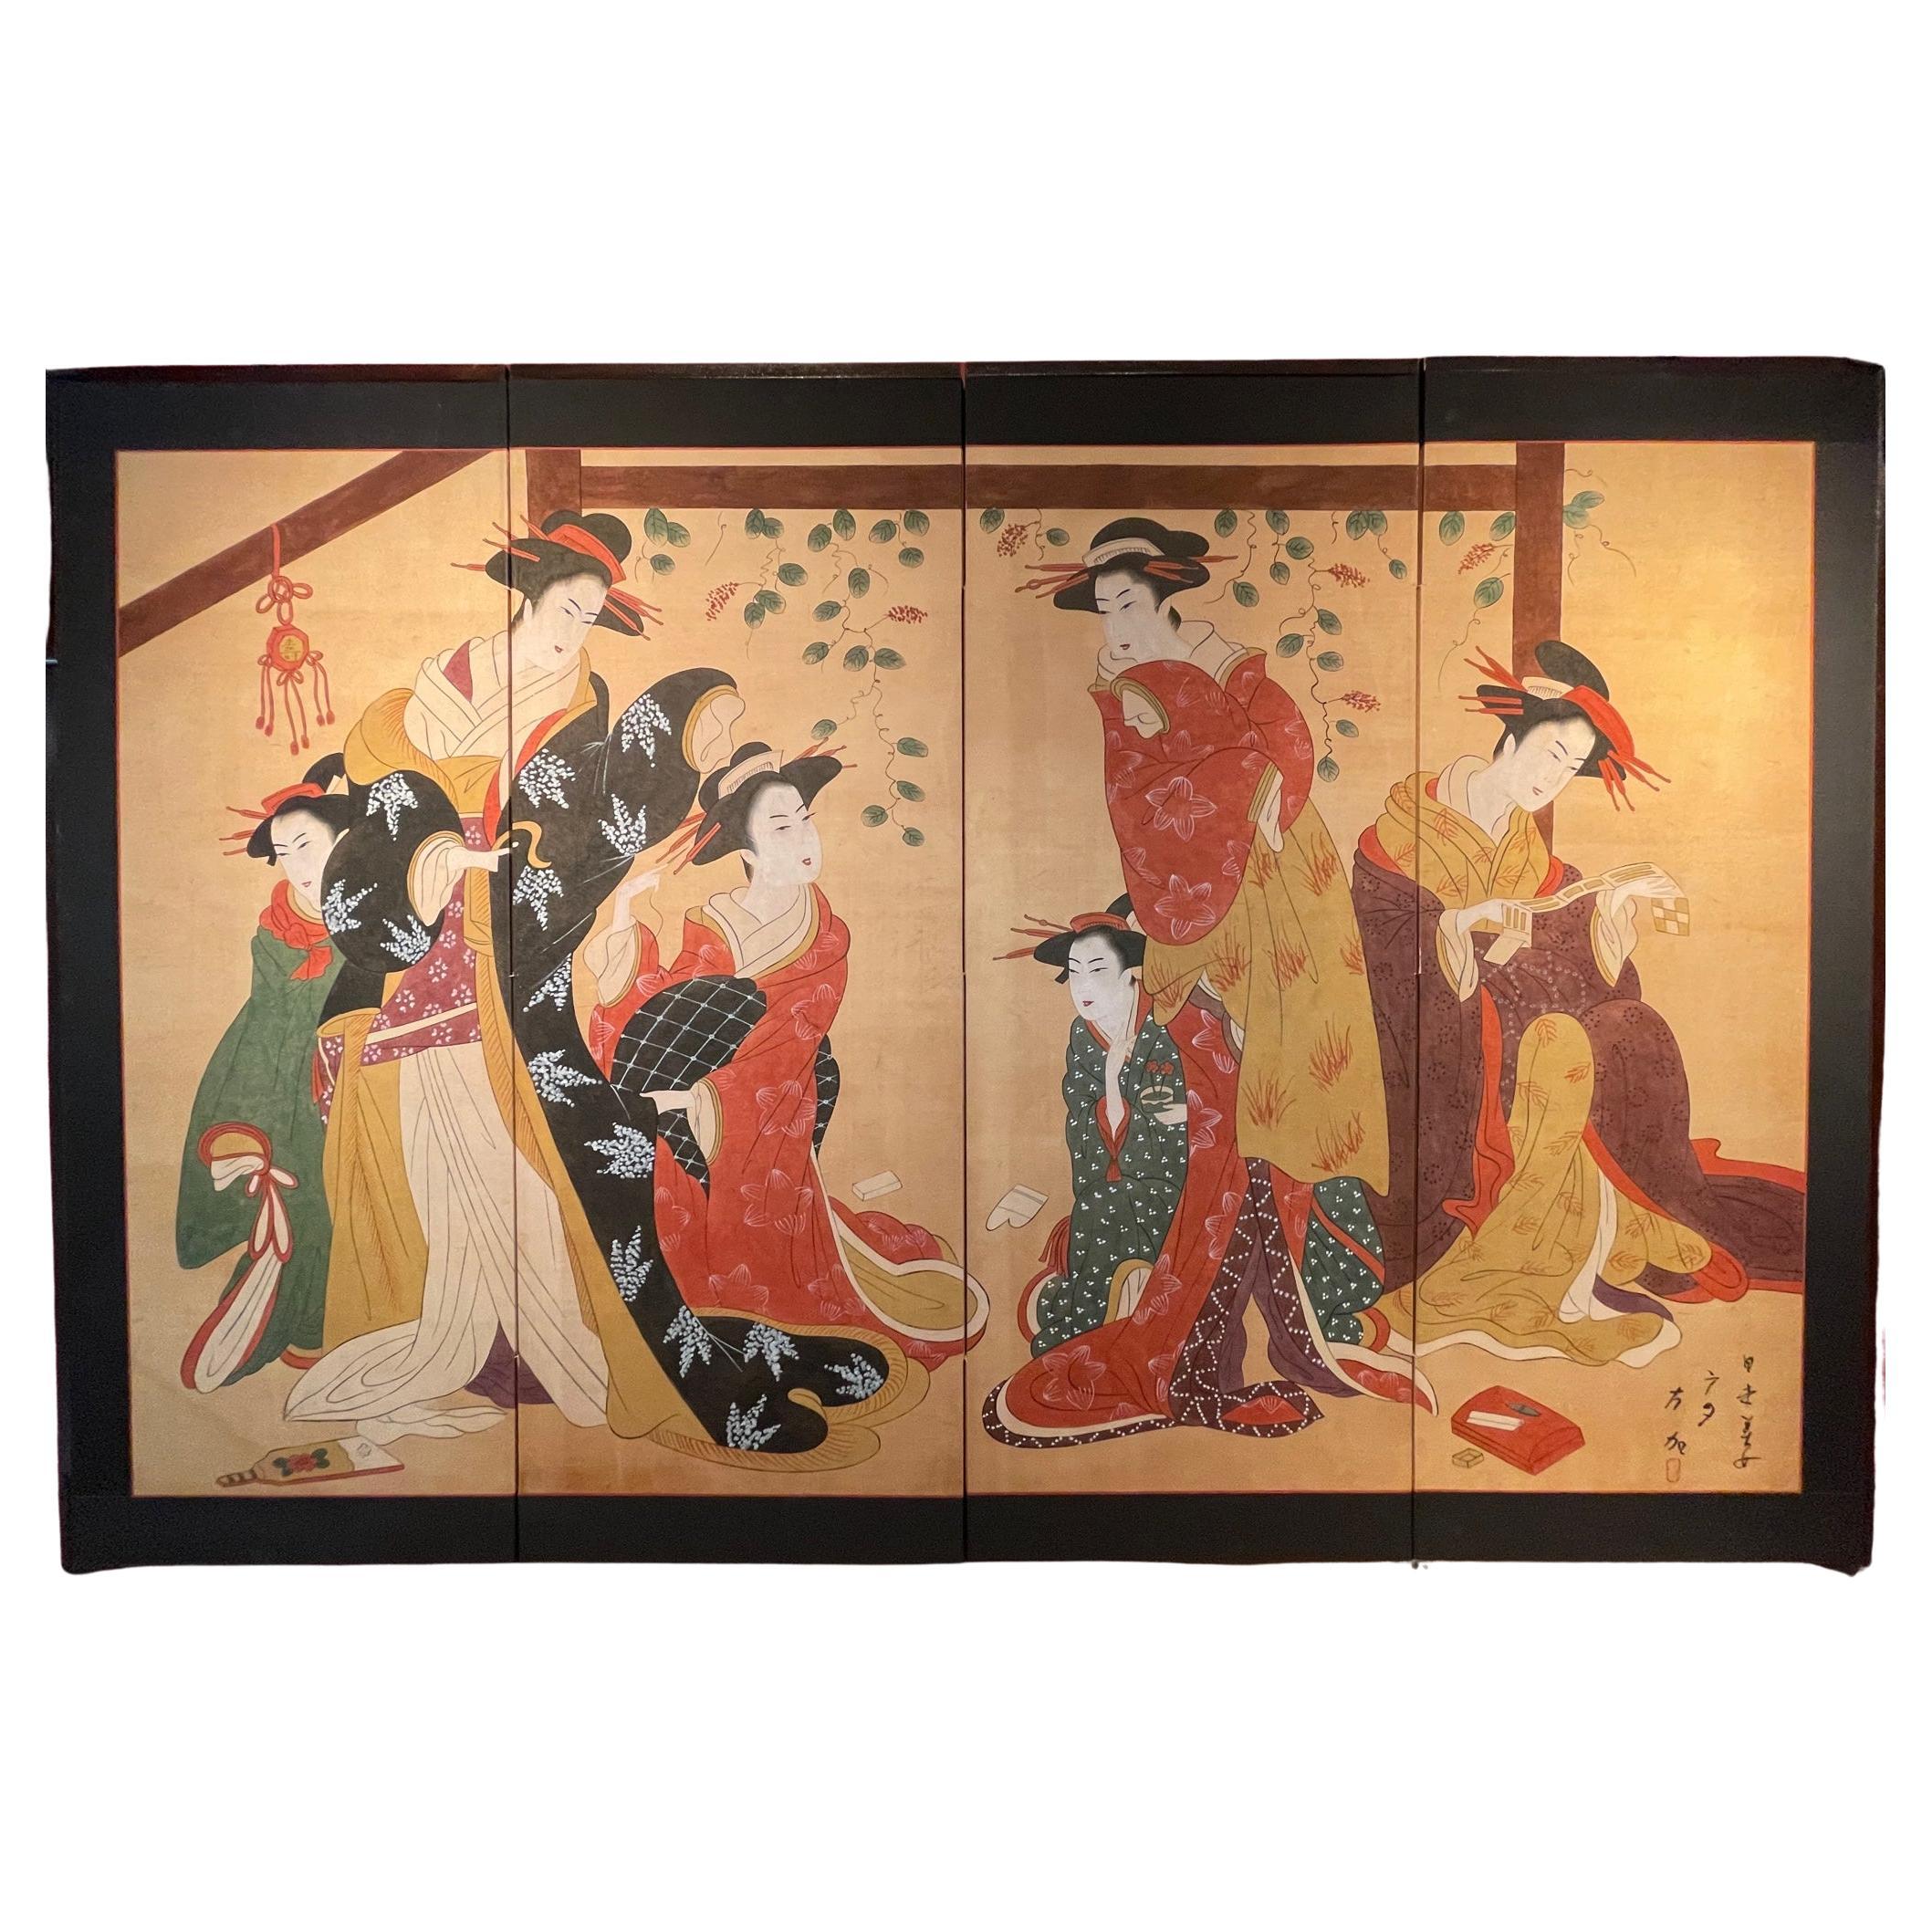  “4 Panels Screen with 6 Geishas Painted in the Ukiyo-e Style For Sale